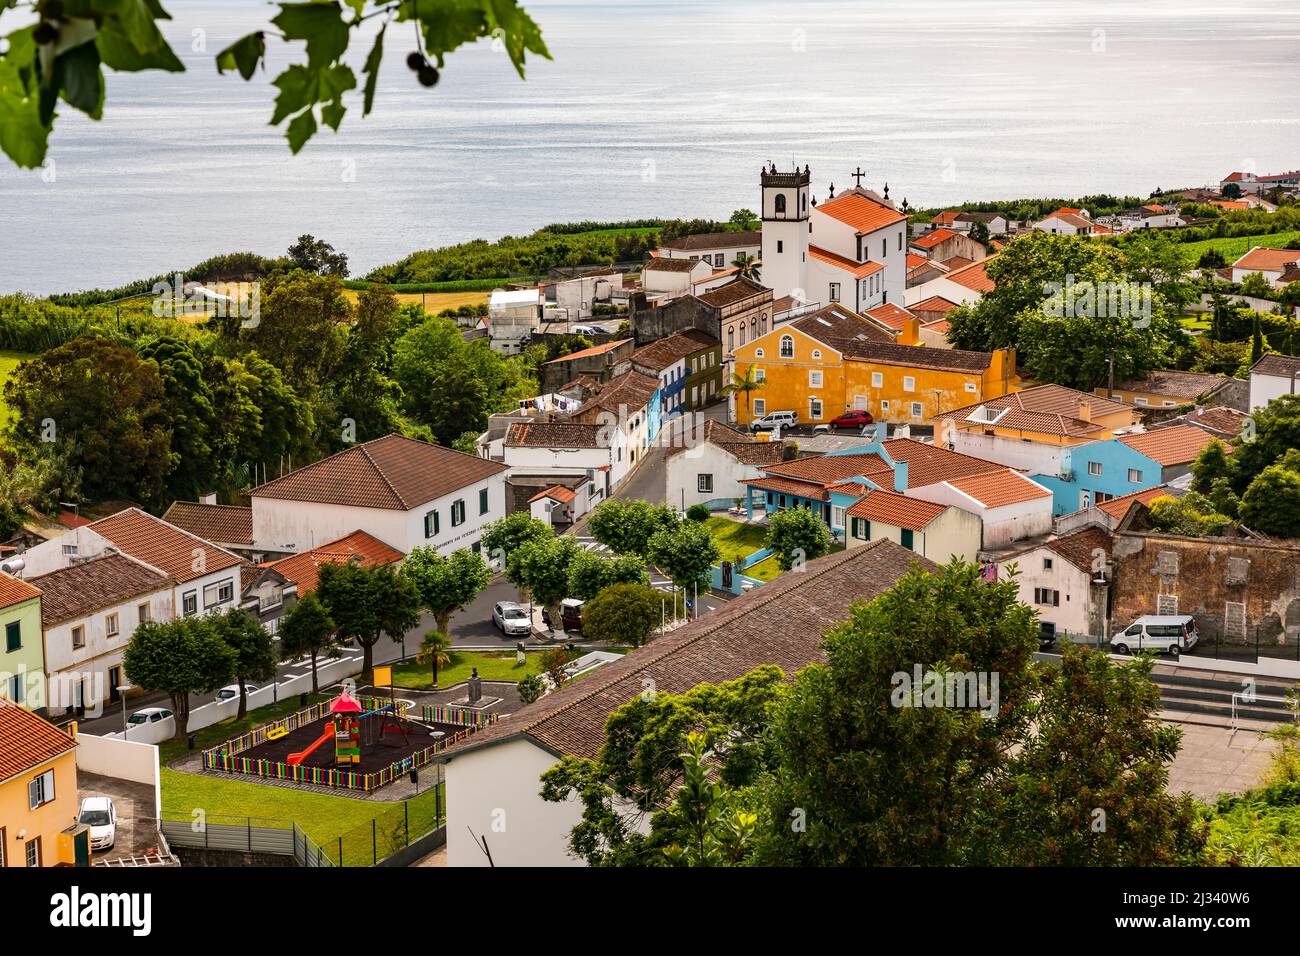 Picturesque village on the coast of the Portuguese island of Sao Miguel in the Atlantic Stock Photo